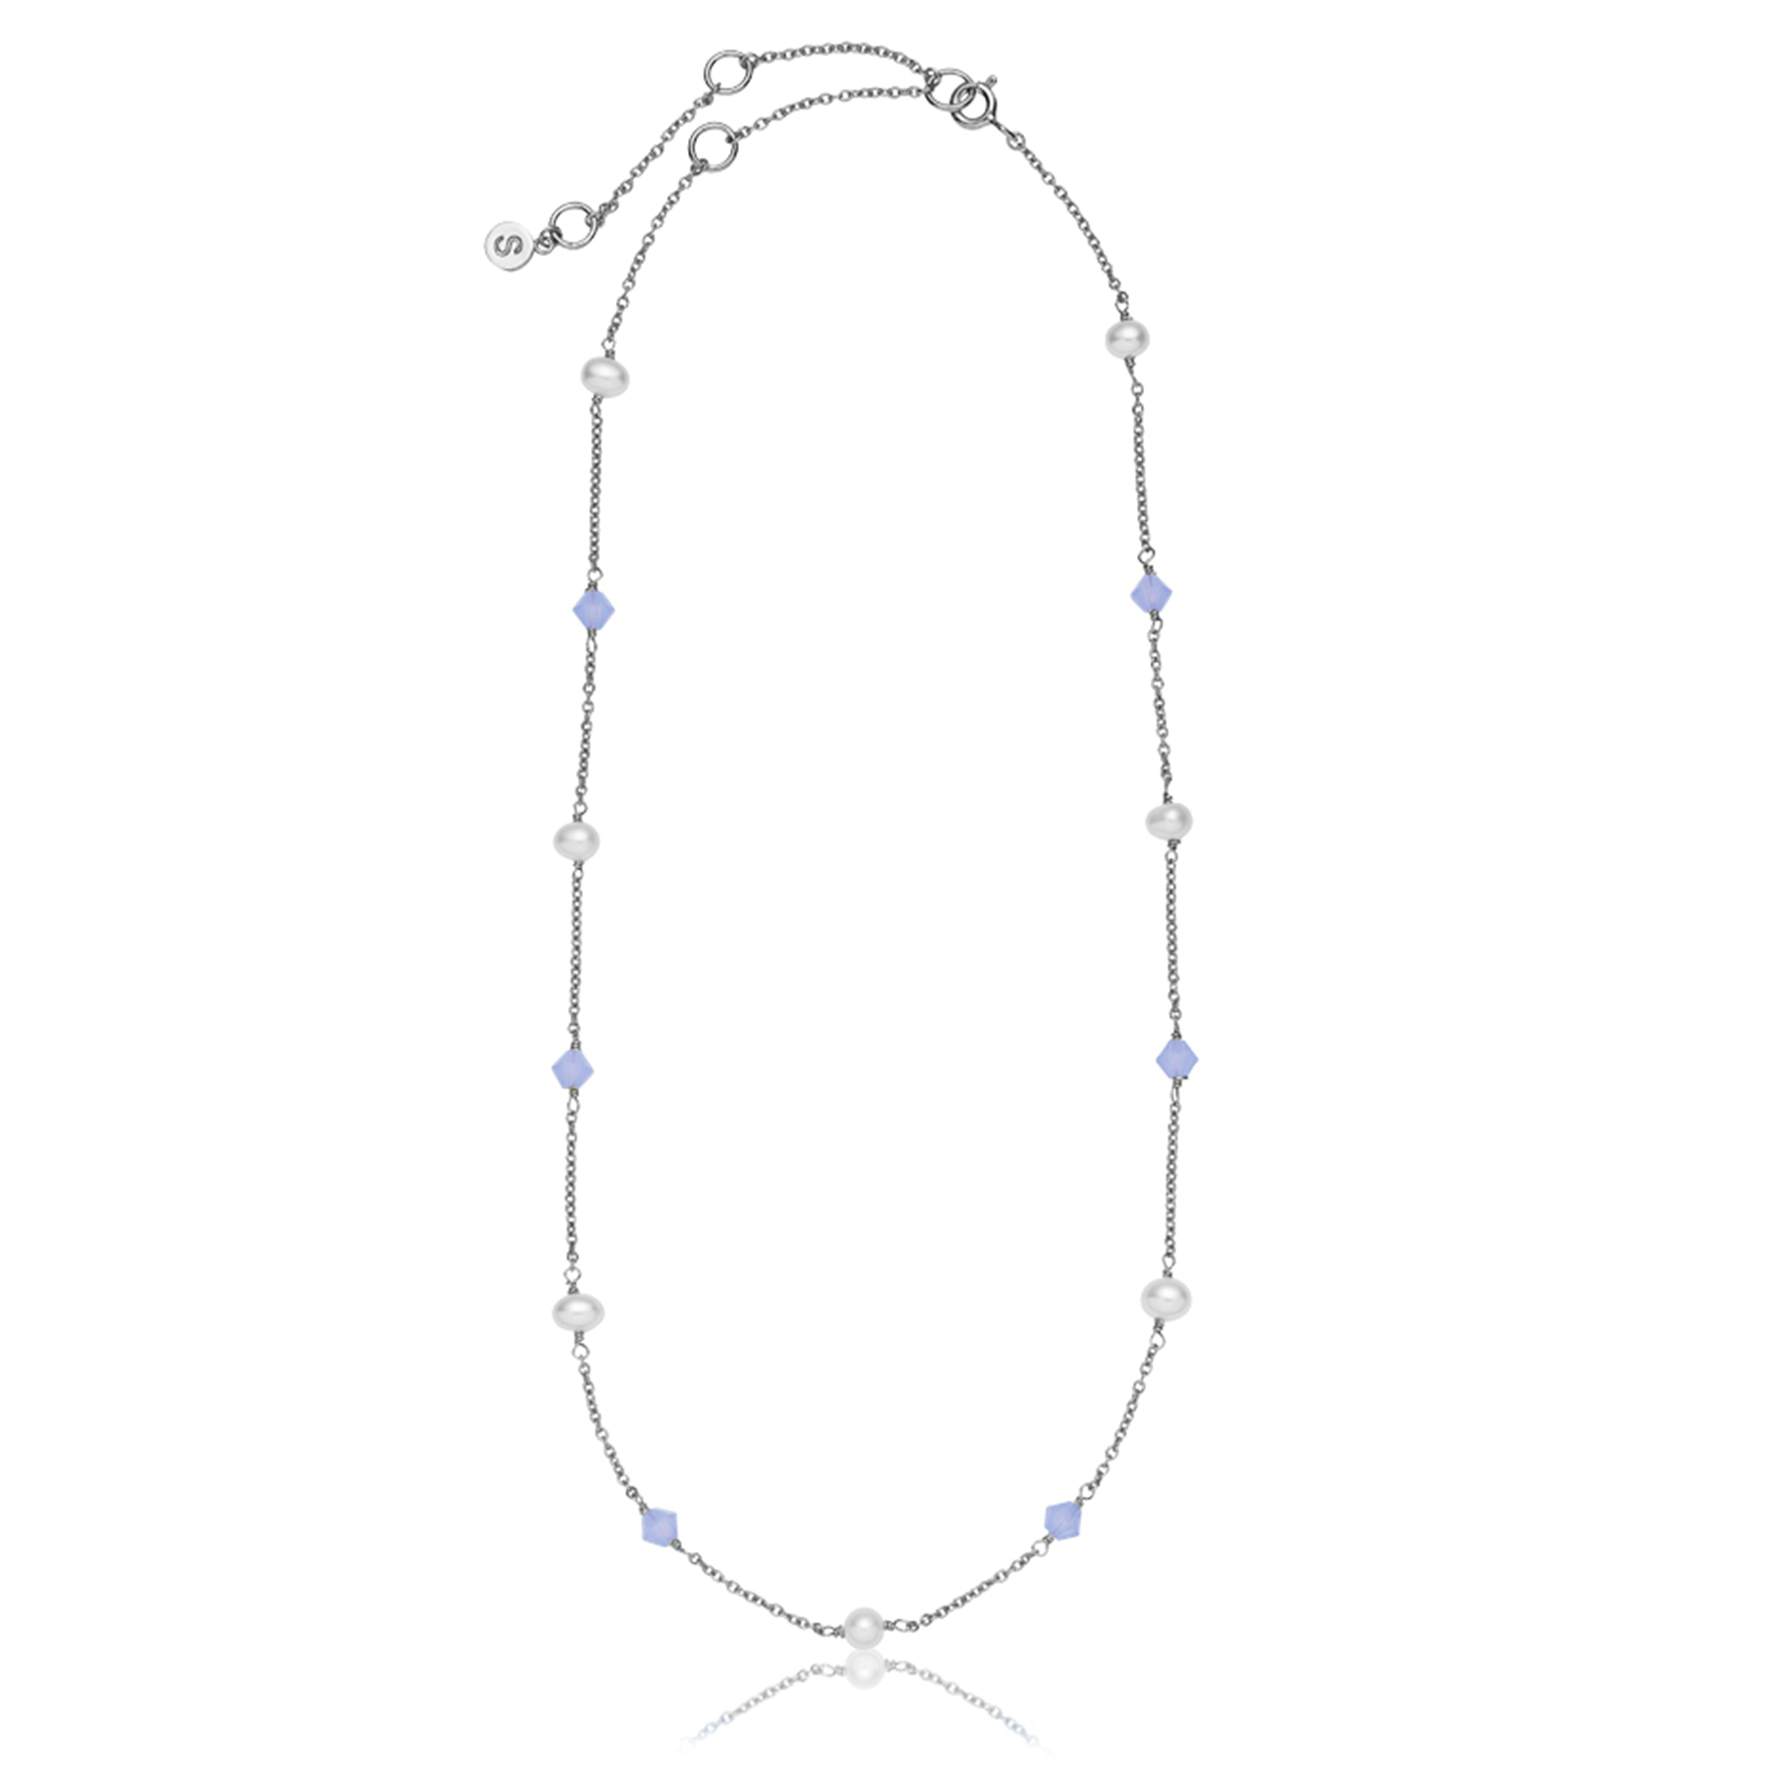 Olivia by Sistie Classic Necklace von Sistie in Silber Sterling 925